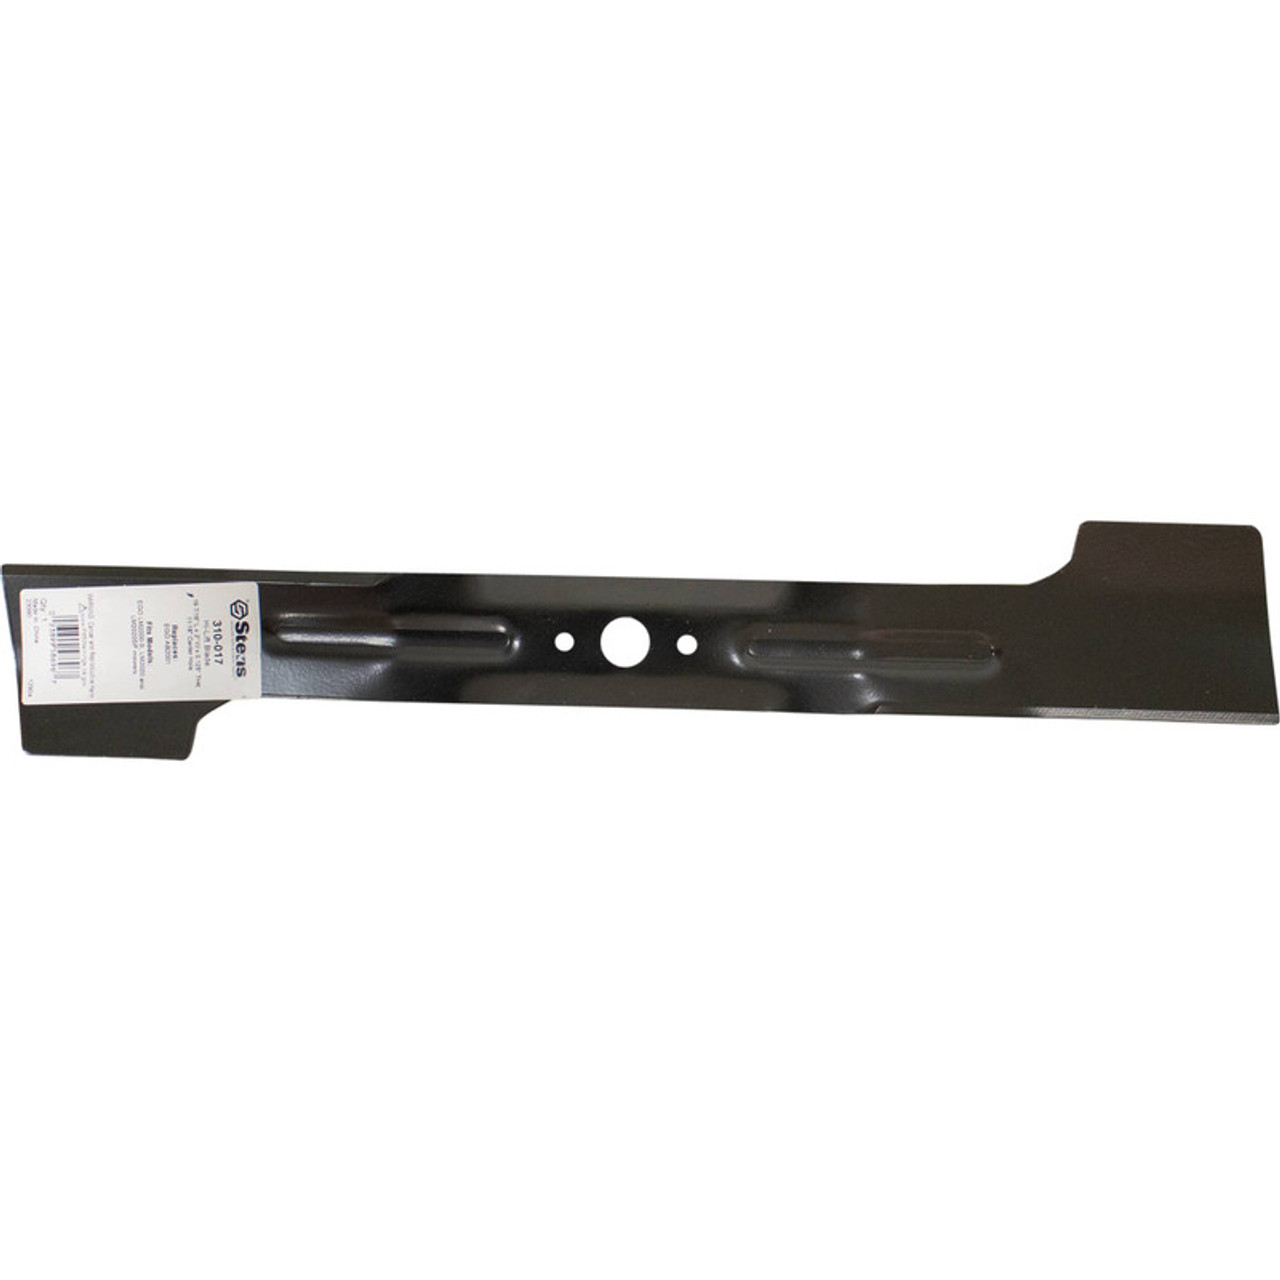 Stens 310-017 Stens Hi-Lift Blade (Replaces Ego AB2001, CH3706023001)